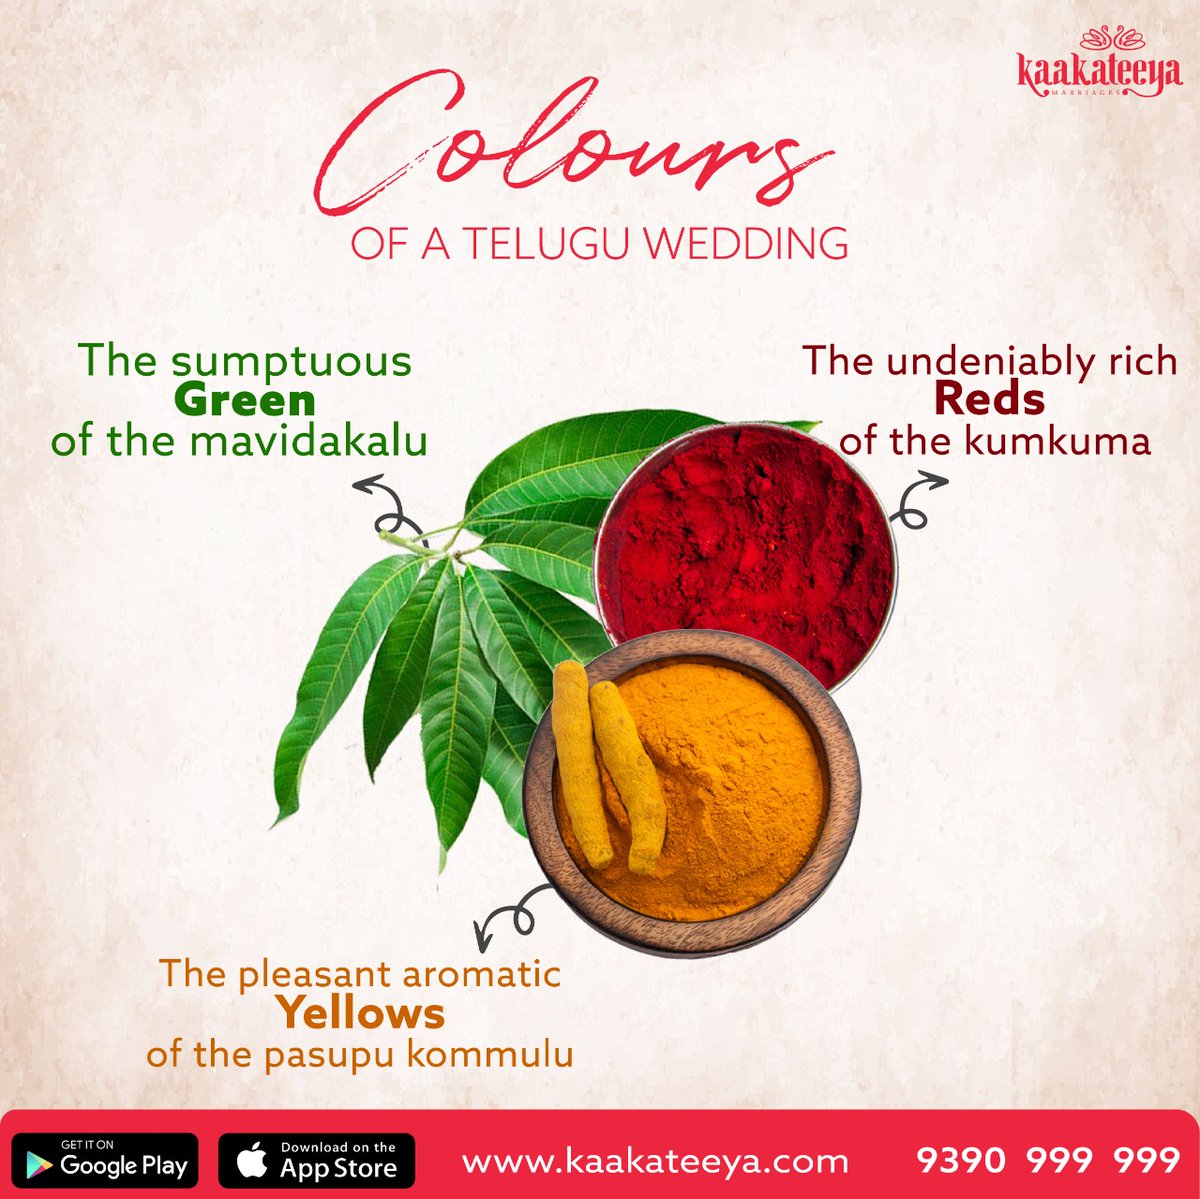 Indian weddings are full of colour and joy. But there are 3 colours that are considered auspicious and play a significant role in Telugu weddings; red, green and yellow. You will fins aspects and objects of these colours throughout the wedding rituals.
#teluguwedding #matrimony